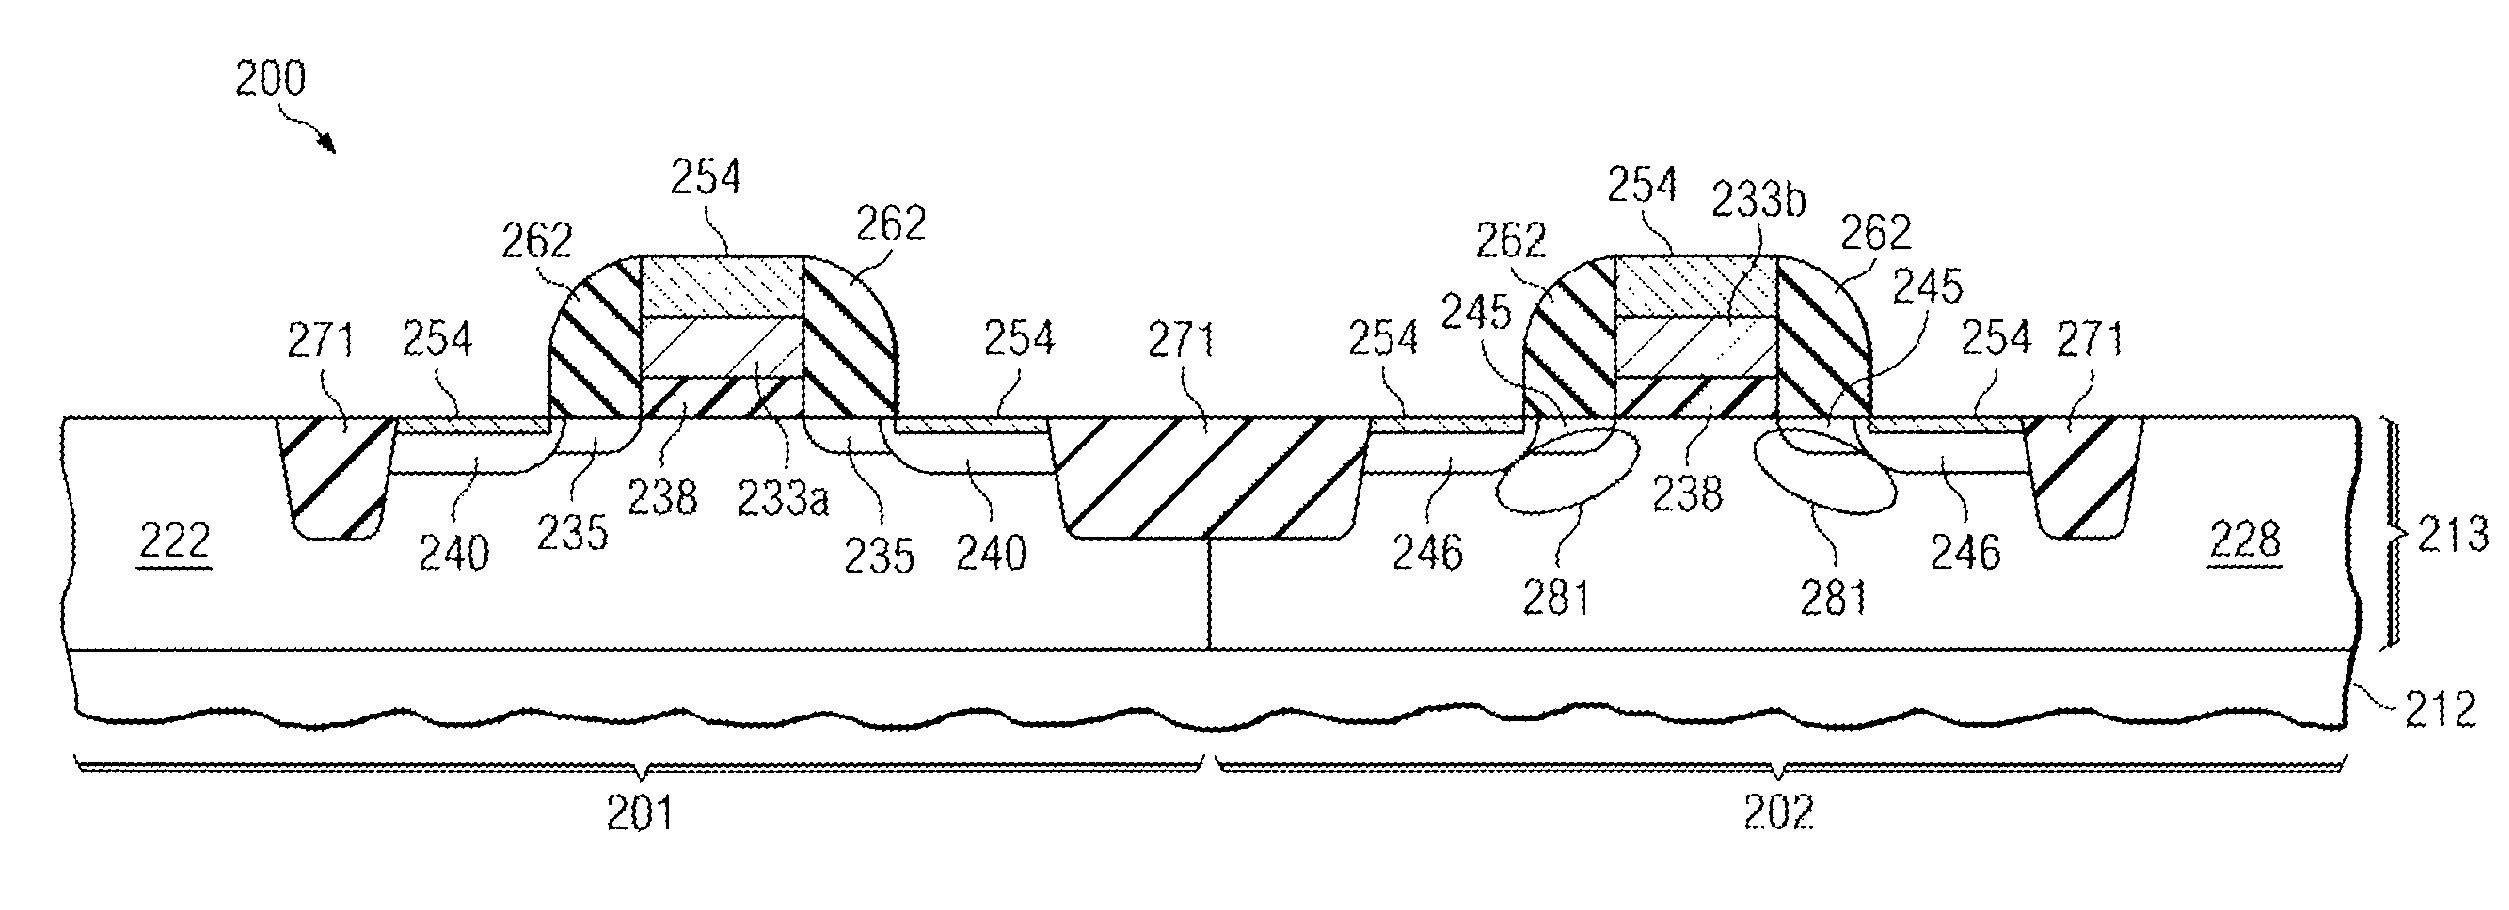 Multiple indium implant methods and devices and integrated circuits therefrom